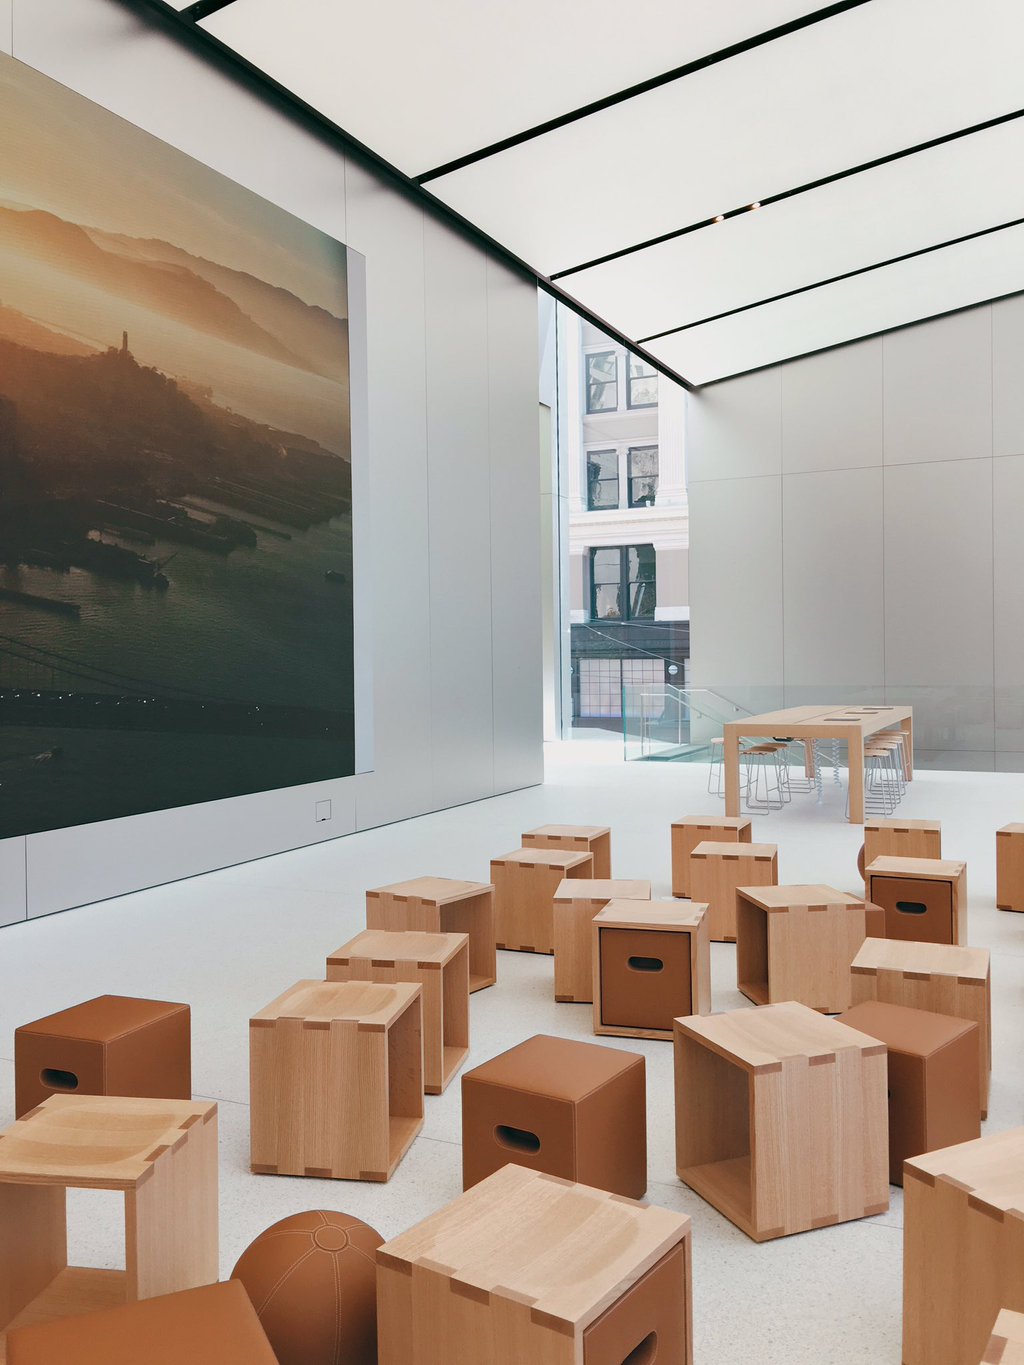 Apple Reveals New Design for Union Square Apple Store With 42 Foot Tall Sliding Glass Doors, Genius Grove, More